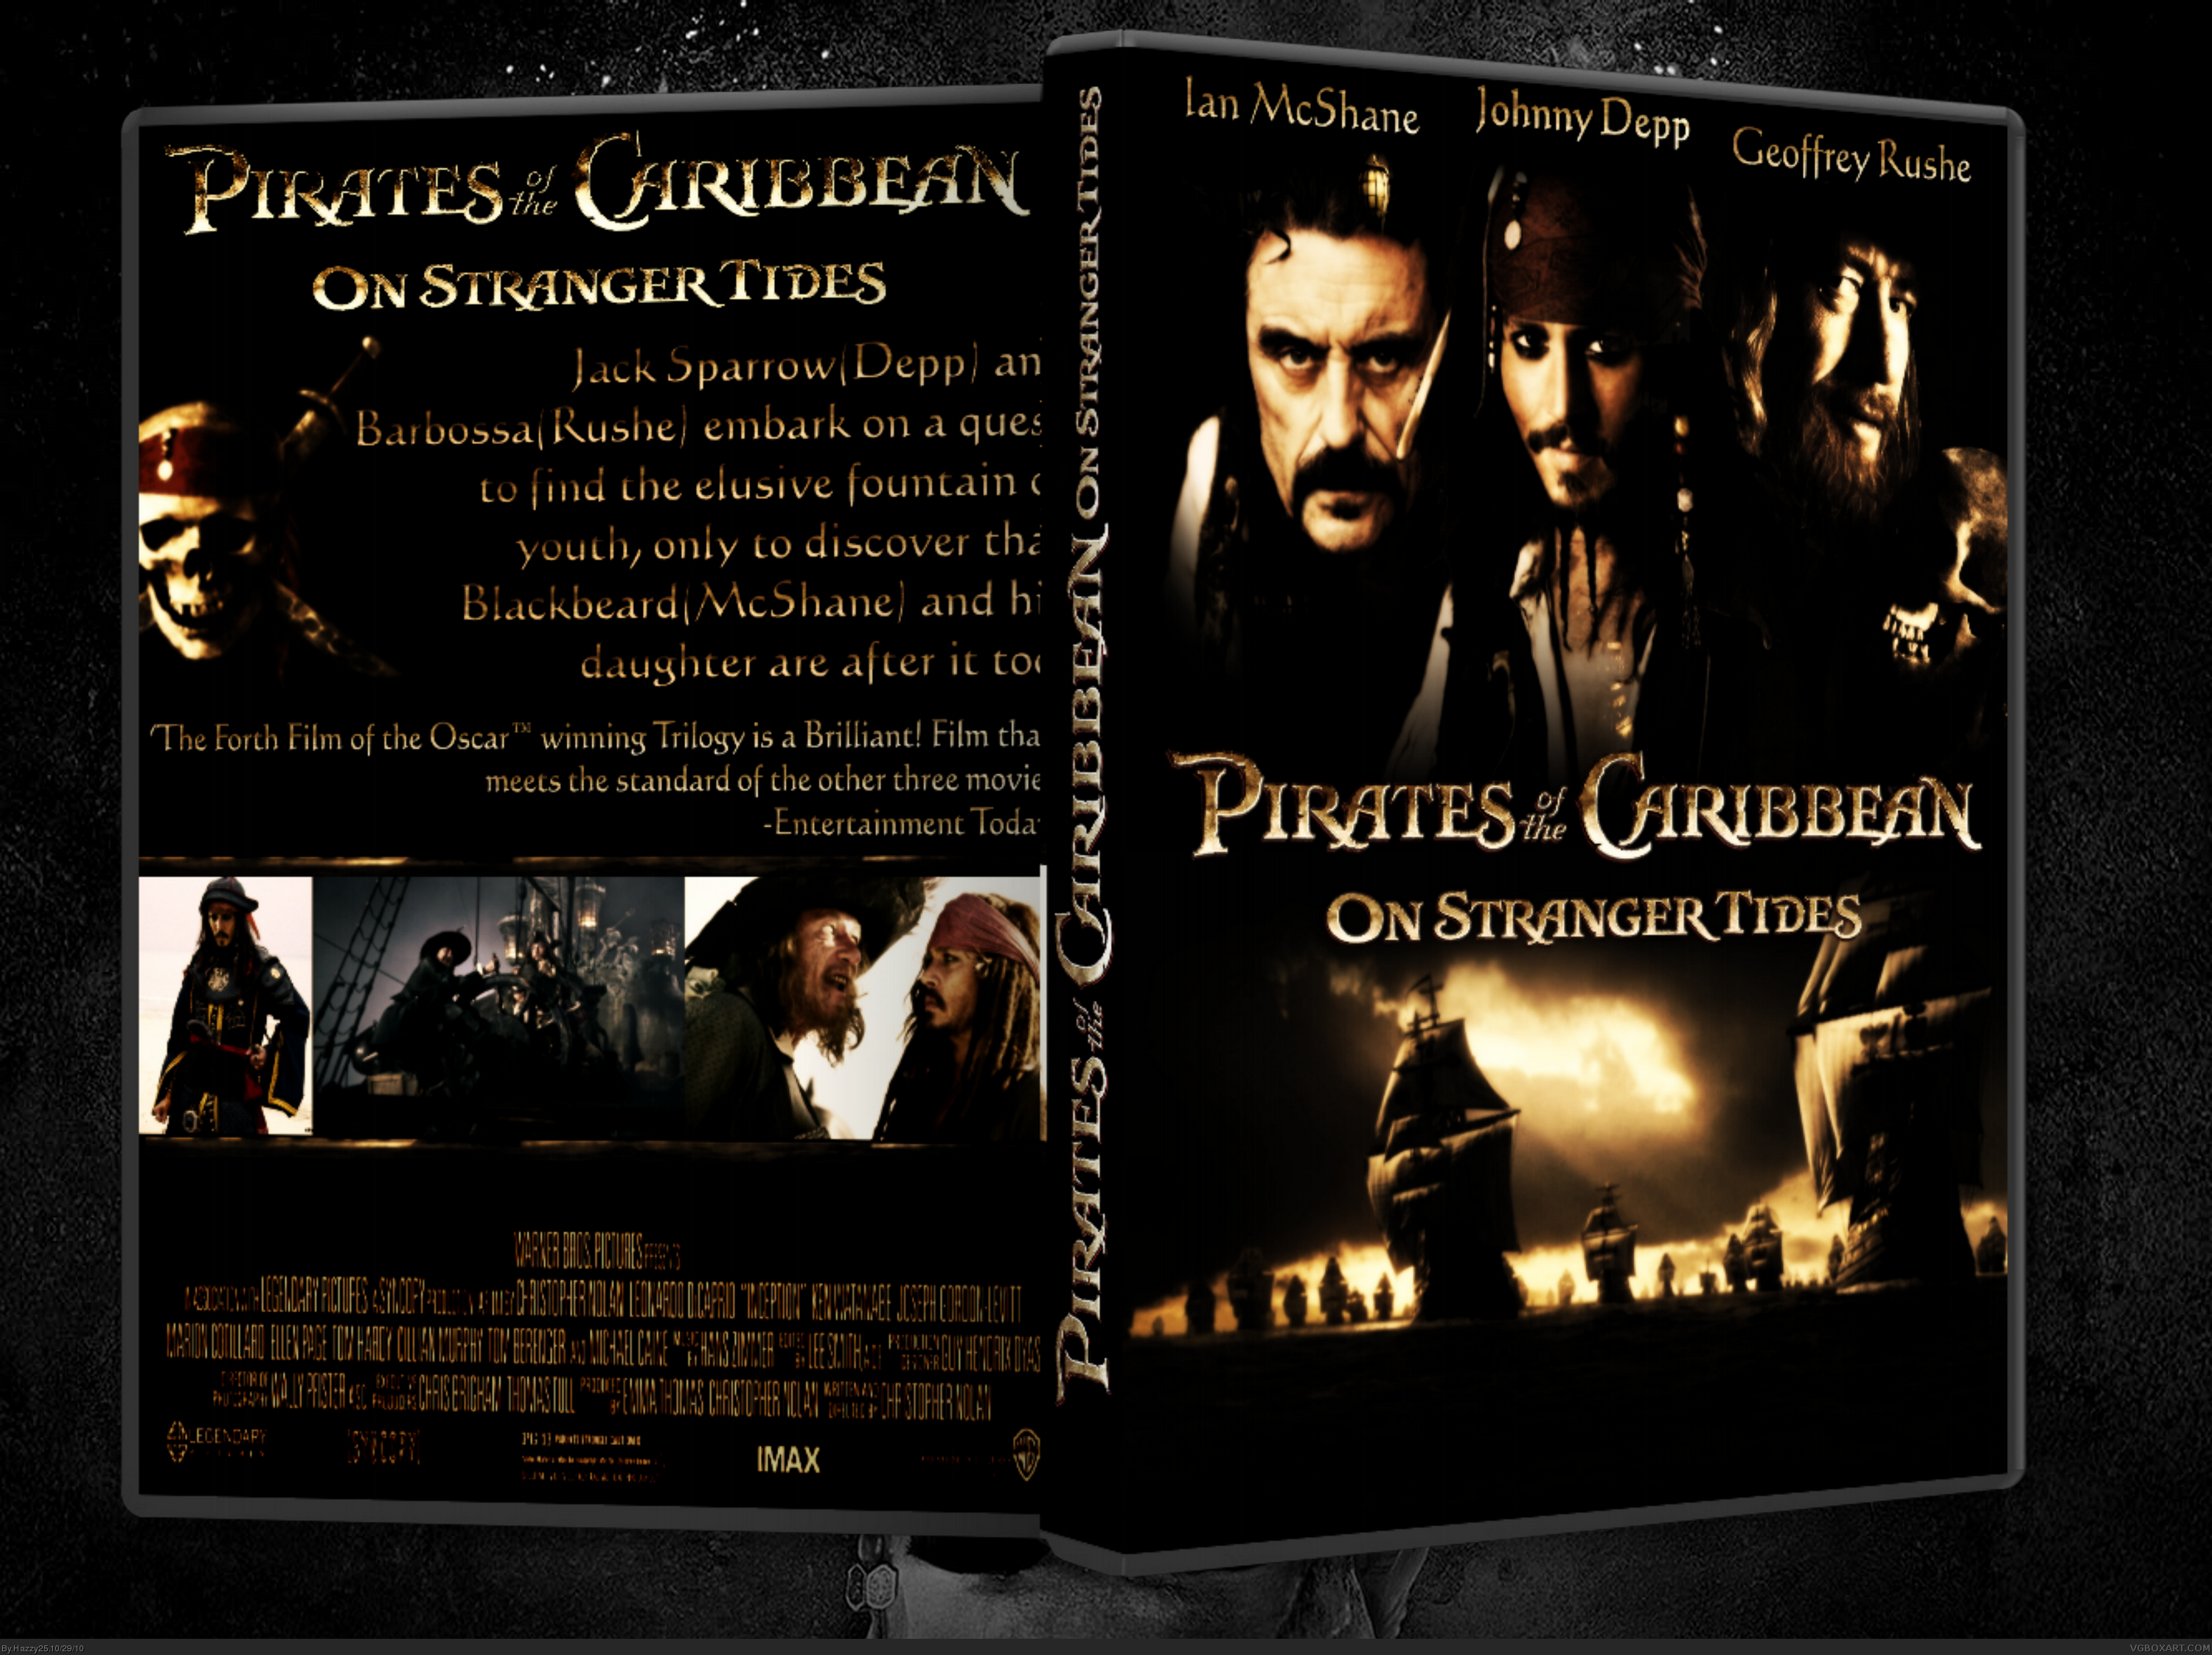 Pirates Of The Caribbean: On Stranger Tides box cover